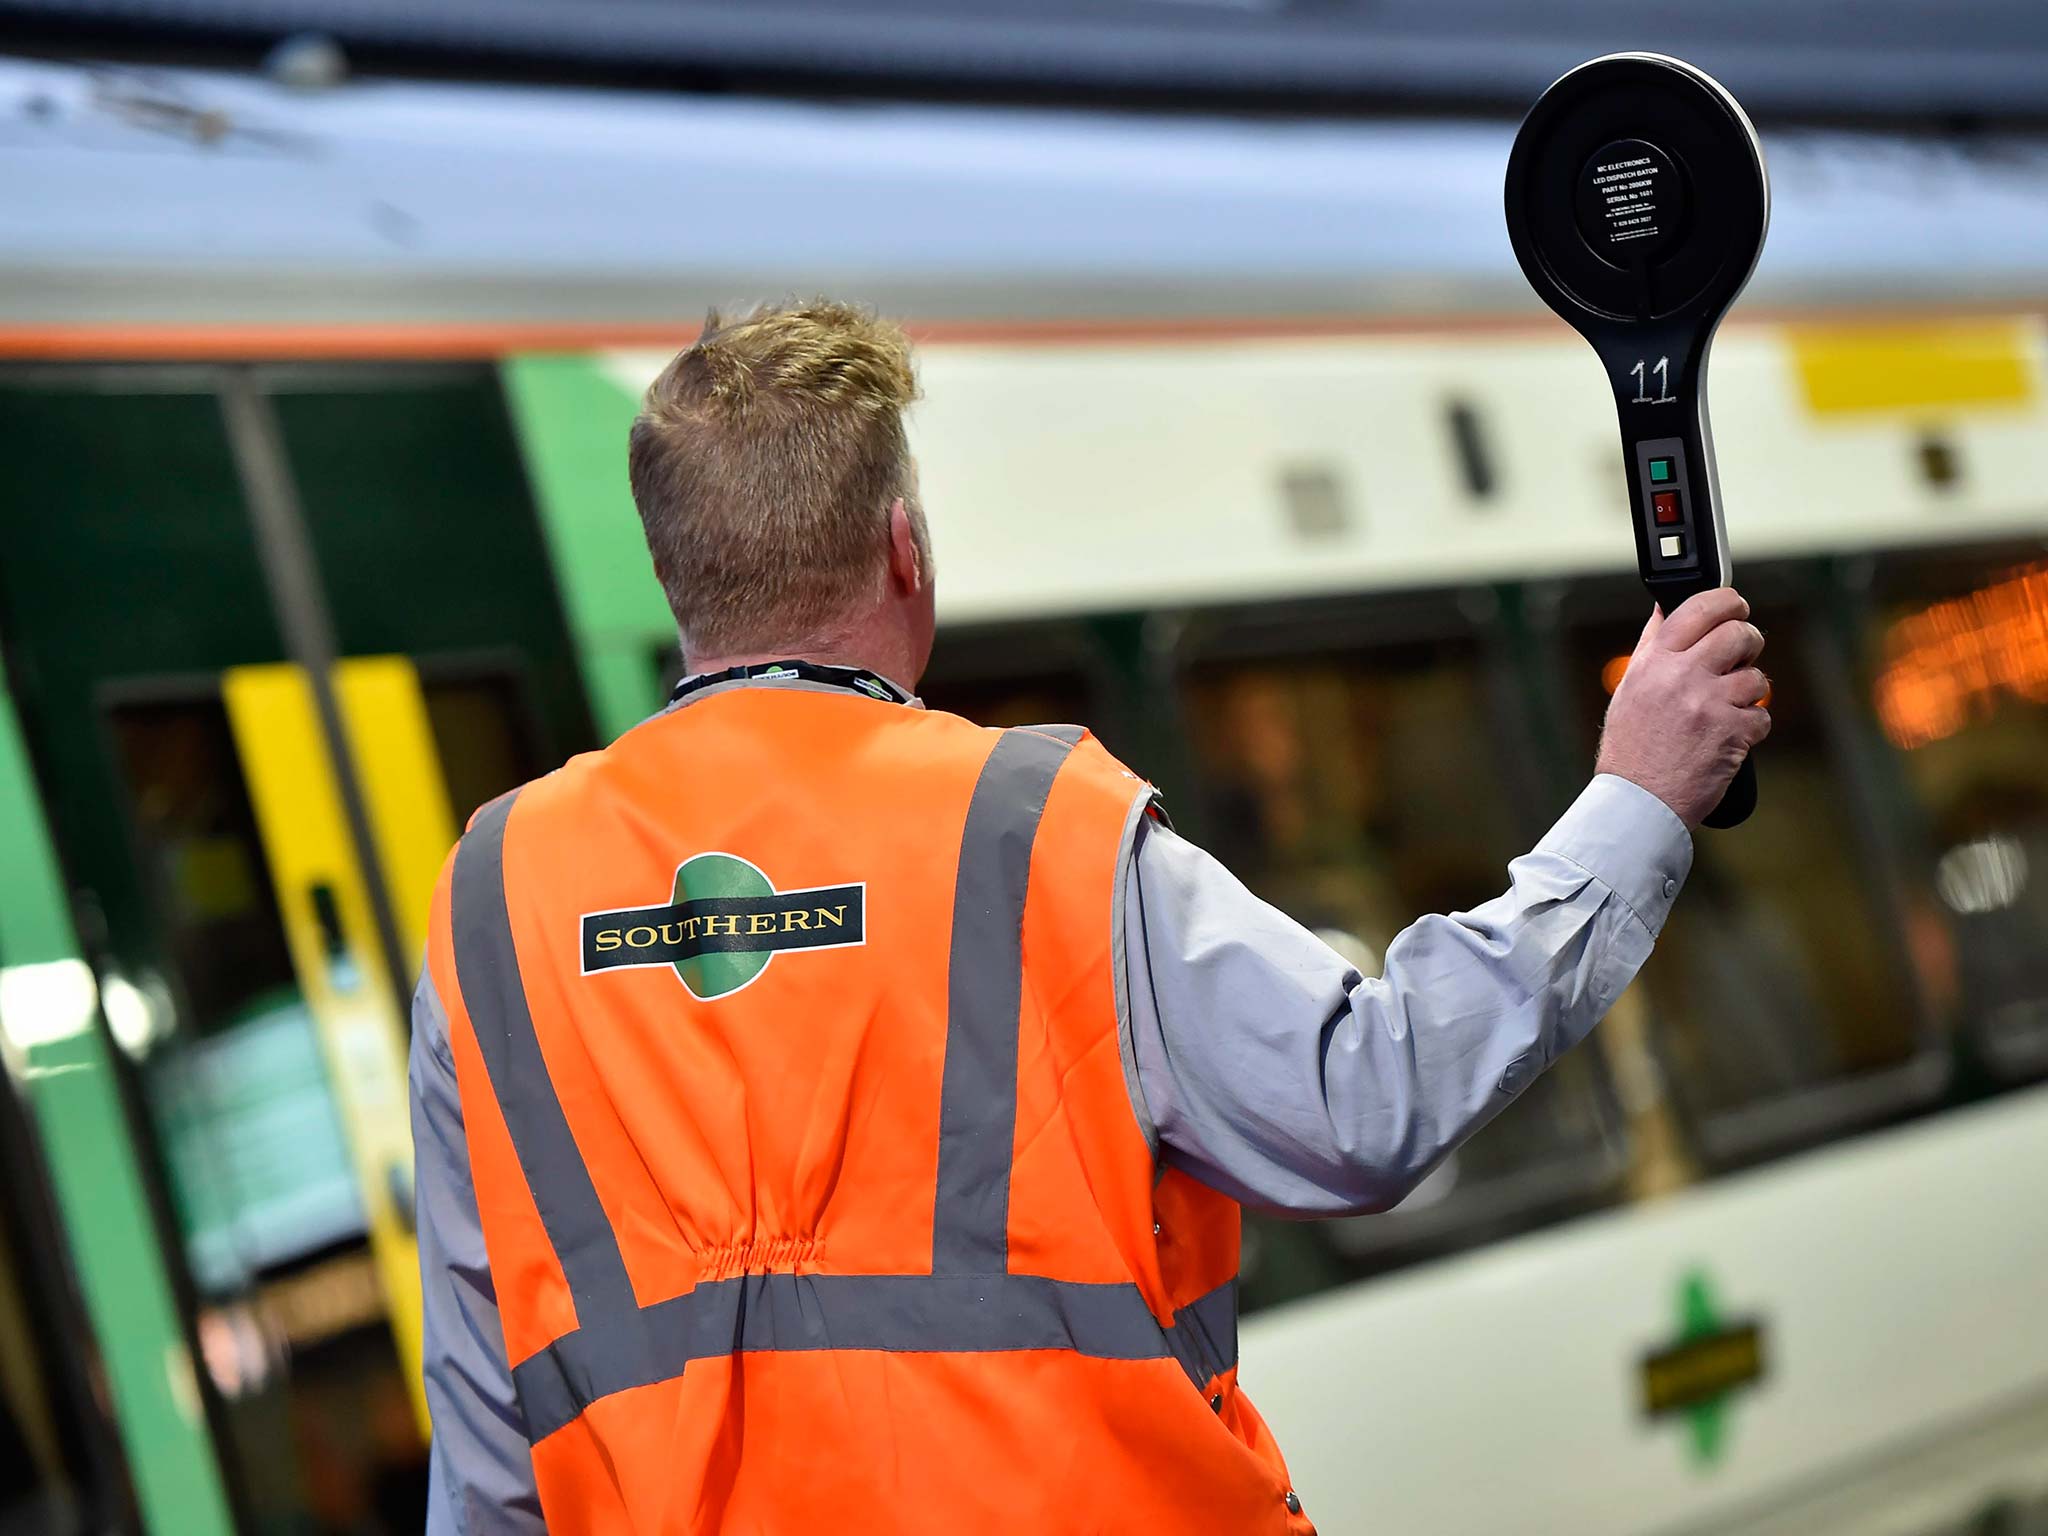 Almost all of Southern Rail's major services will be disrupted, and most of them cancelled entirely